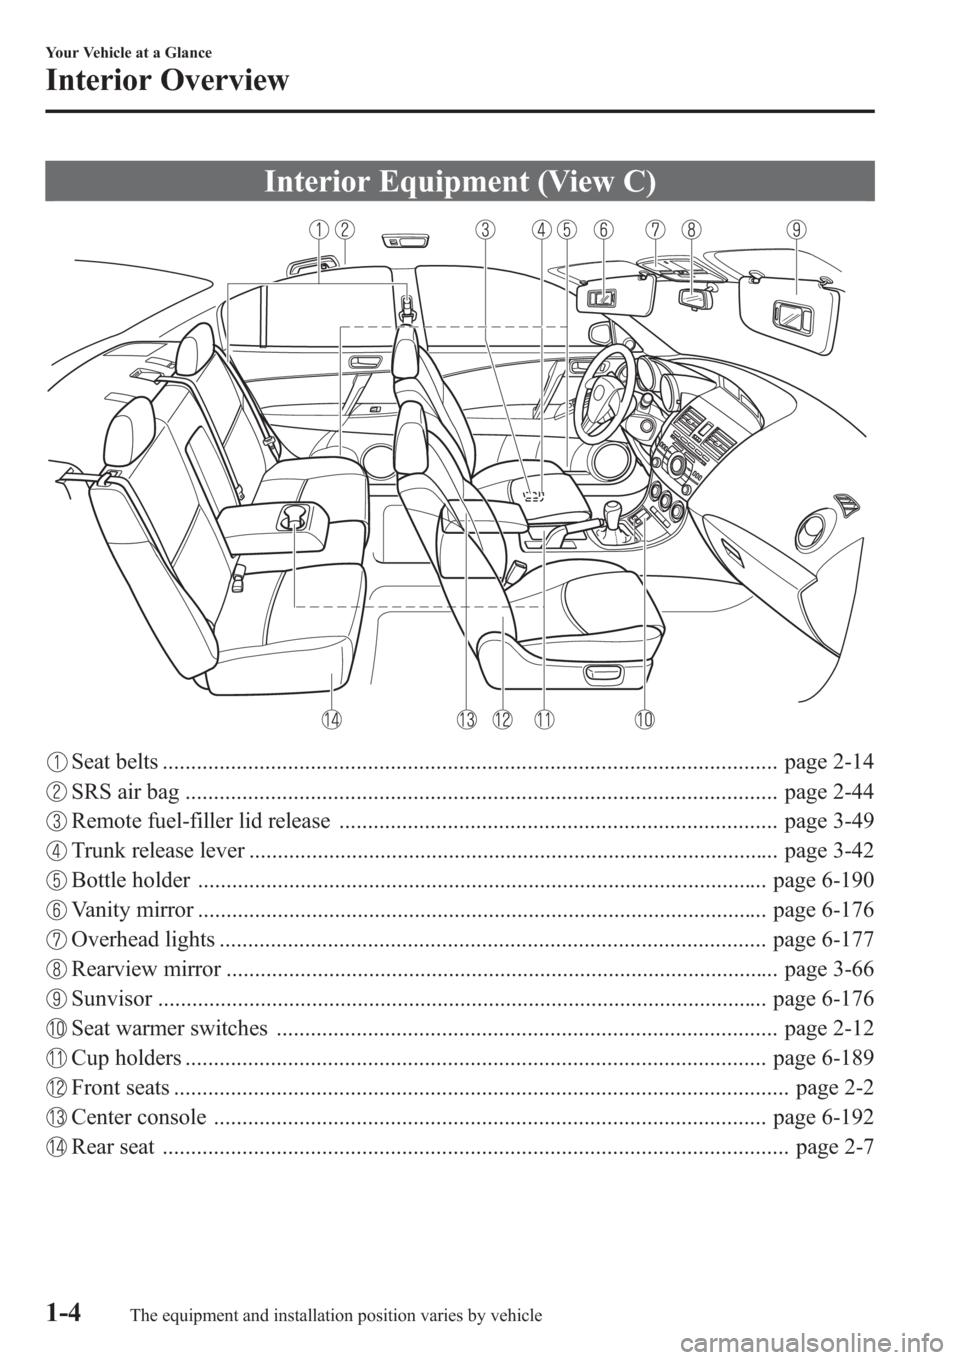 MAZDA MODEL 3 HATCHBACK 2013  Owners Manual (in English) Interior Equipment (View C)
Seat belts ............................................................................................................ page 2-14
SRS air bag ..............................